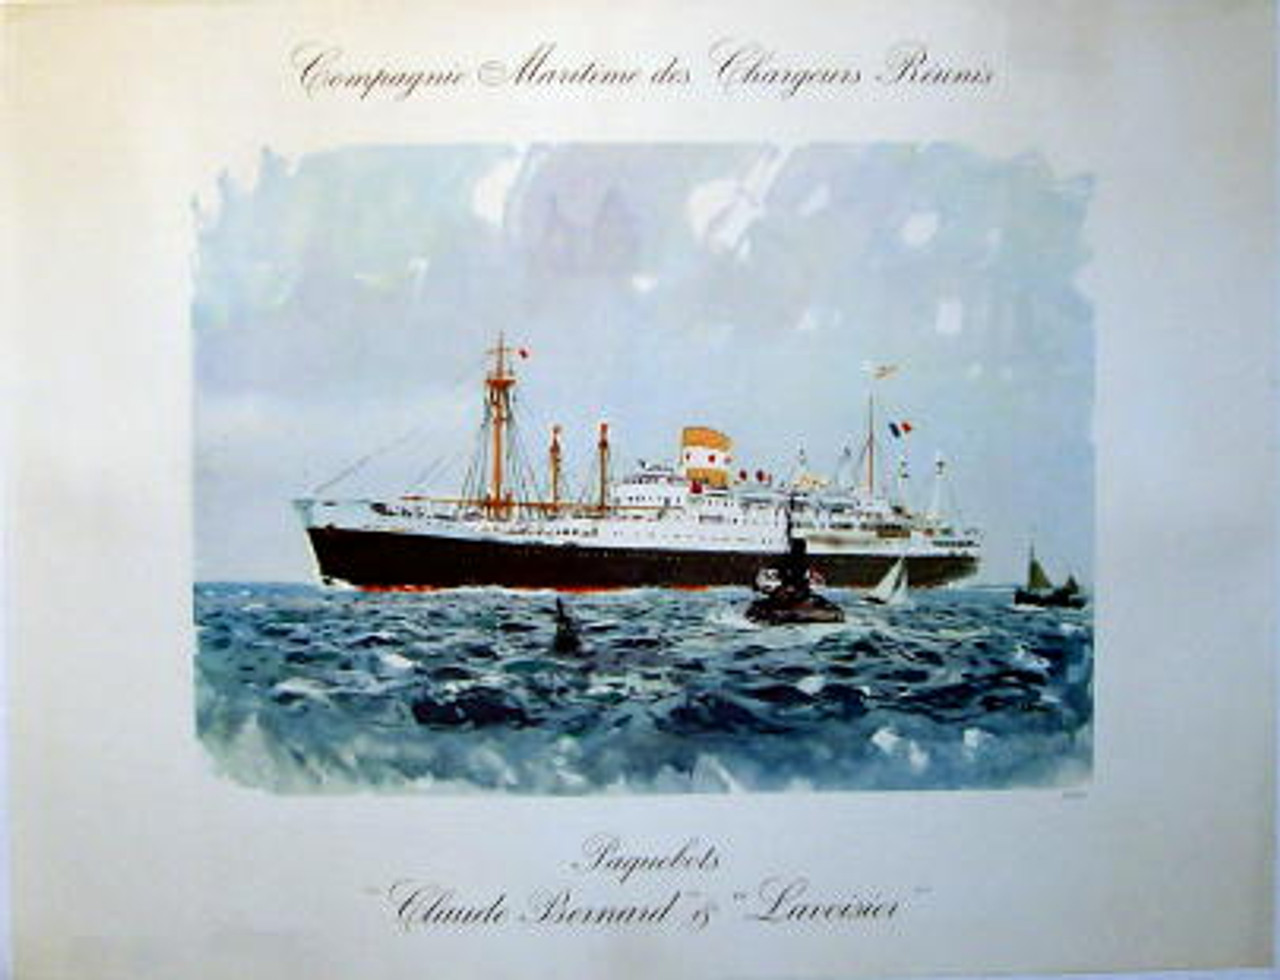 Compagnie Maritime des Chargeurs Reunis original travel French poster from 1948 by A. Brenet. Horizontal poster features large ship in the ocean sea with couple small boats near by.